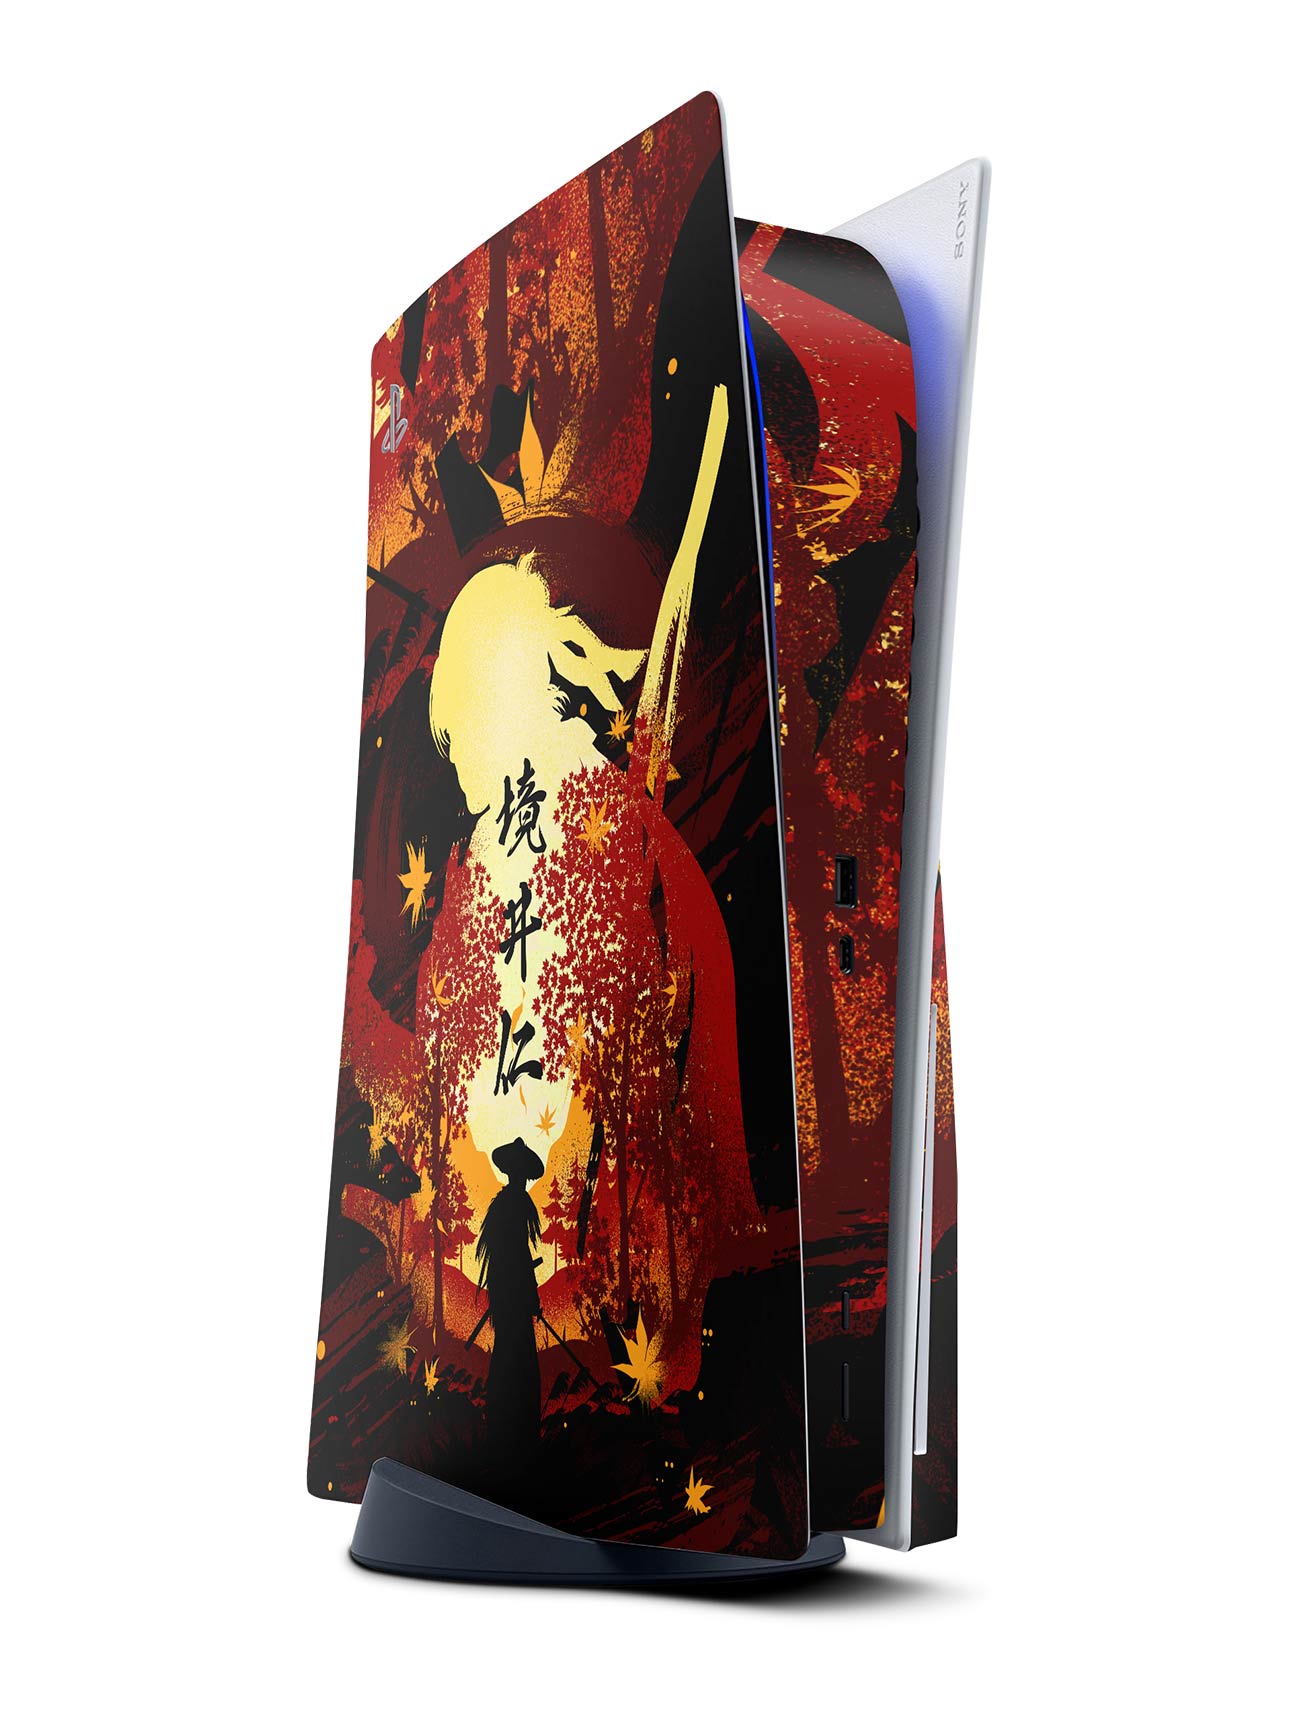 Generic Ghost Of Tsushima PS5 Standard Disc Edition Skin Sticker